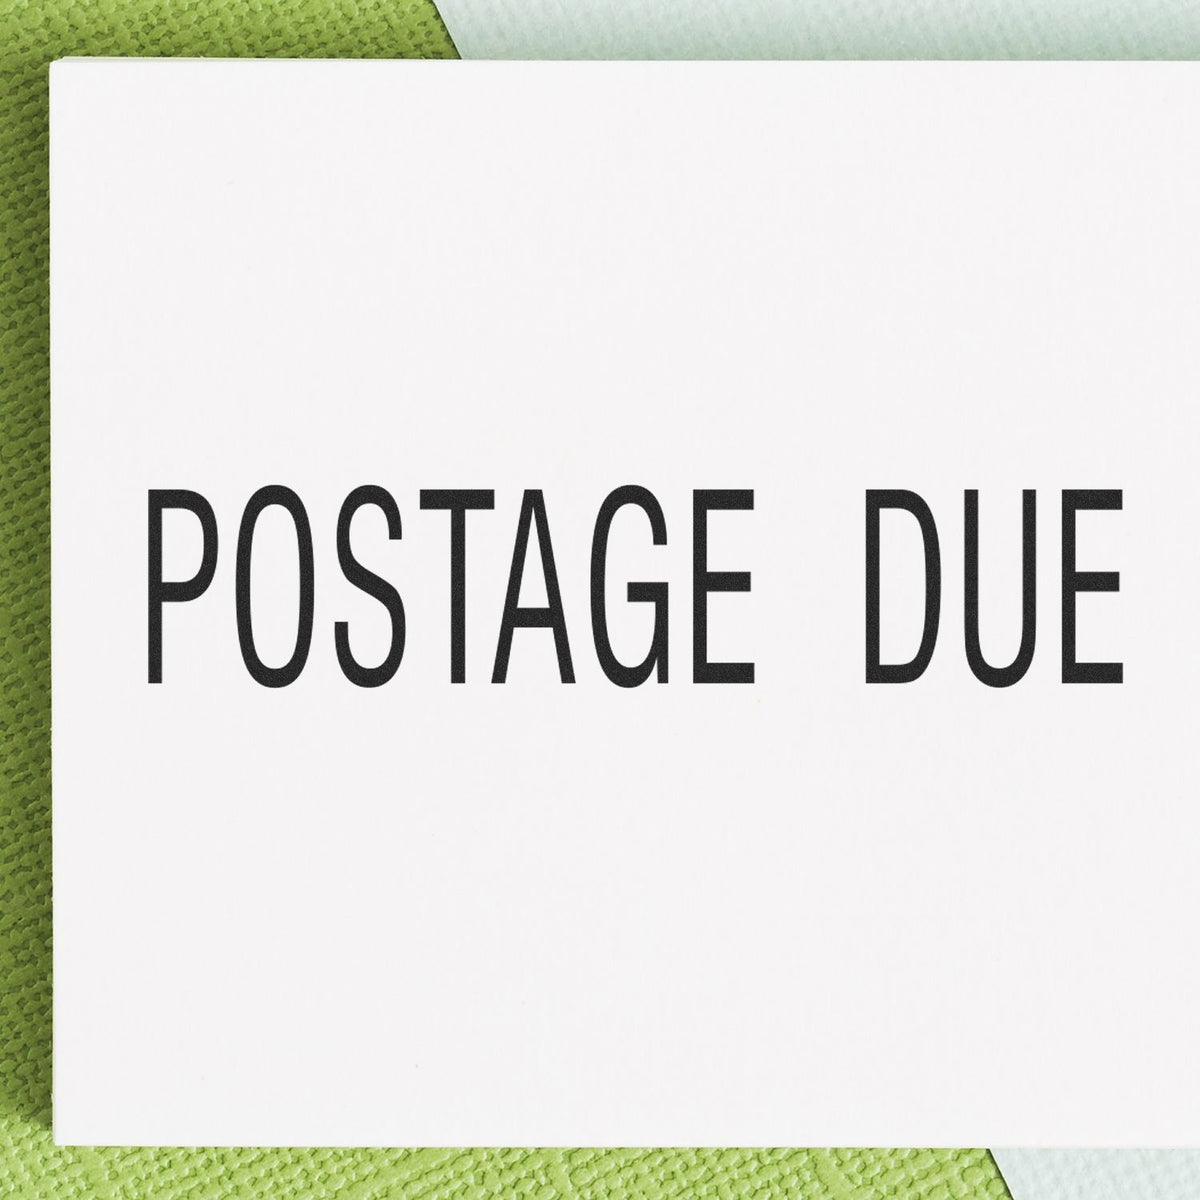 Postage Due Rubber Stamp Lifestyle Photo